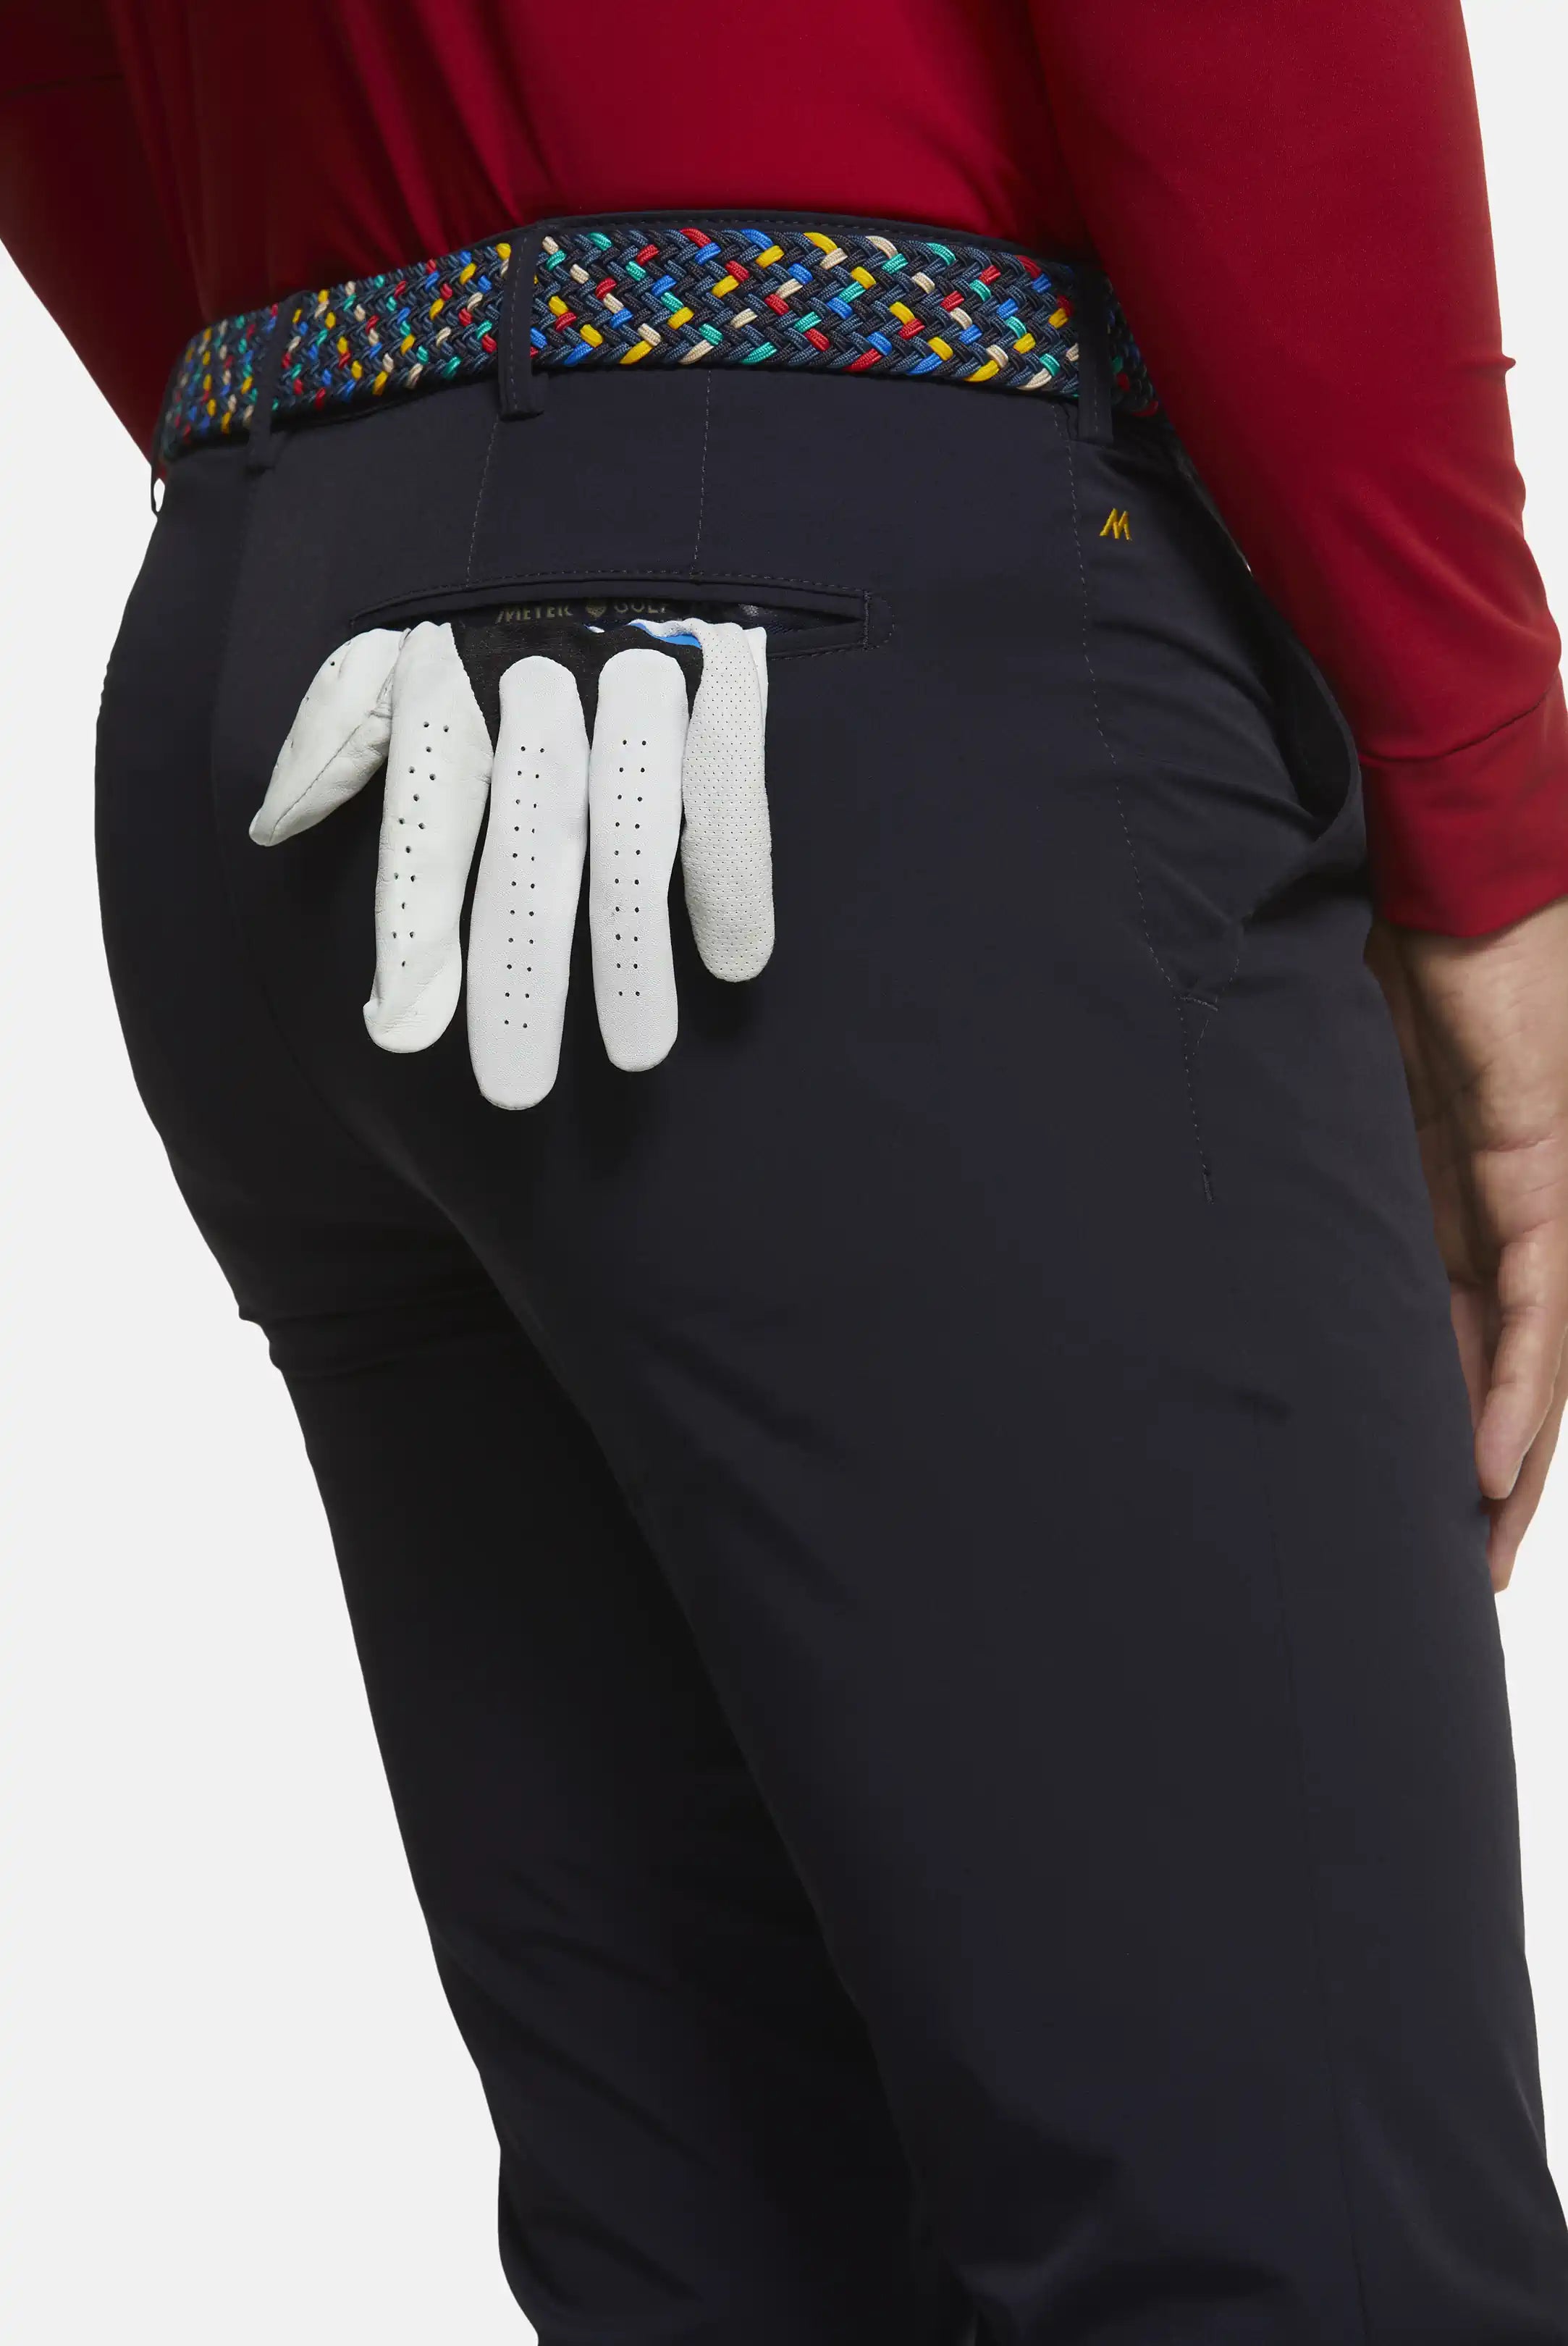 MEYER Golf Trousers - Augusta 8070 High Performance Chinos - Navy